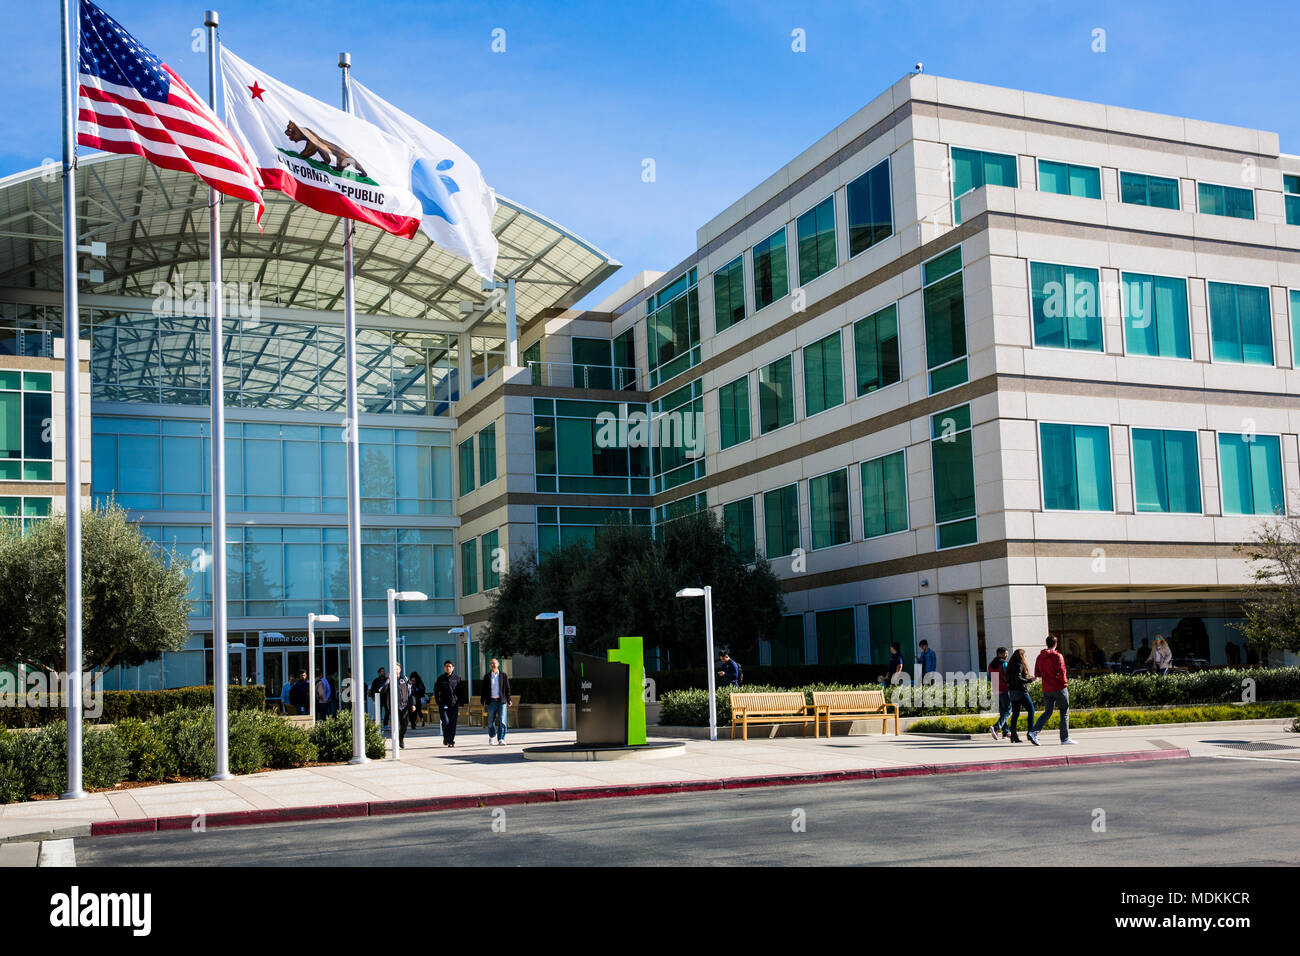 Apple Infinite Loop, Cupertino, California, United States (USA) - January 30, 2017: Apple stuff and visitors in front of the Apple world headquarters Stock Photo